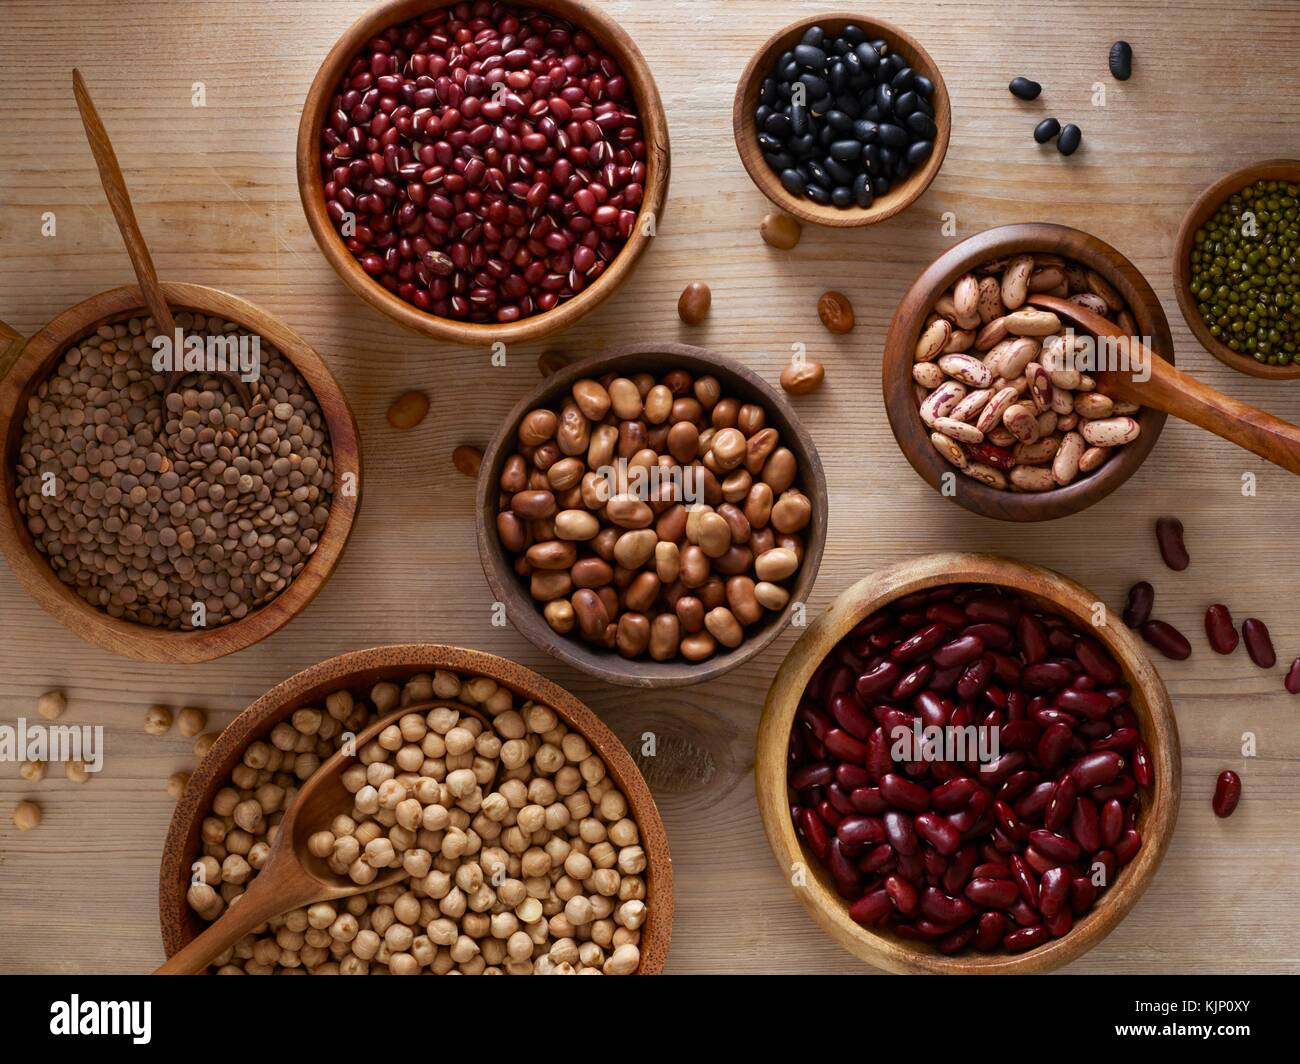 Pulses in wooden bowls, overhead view. Stock Photo